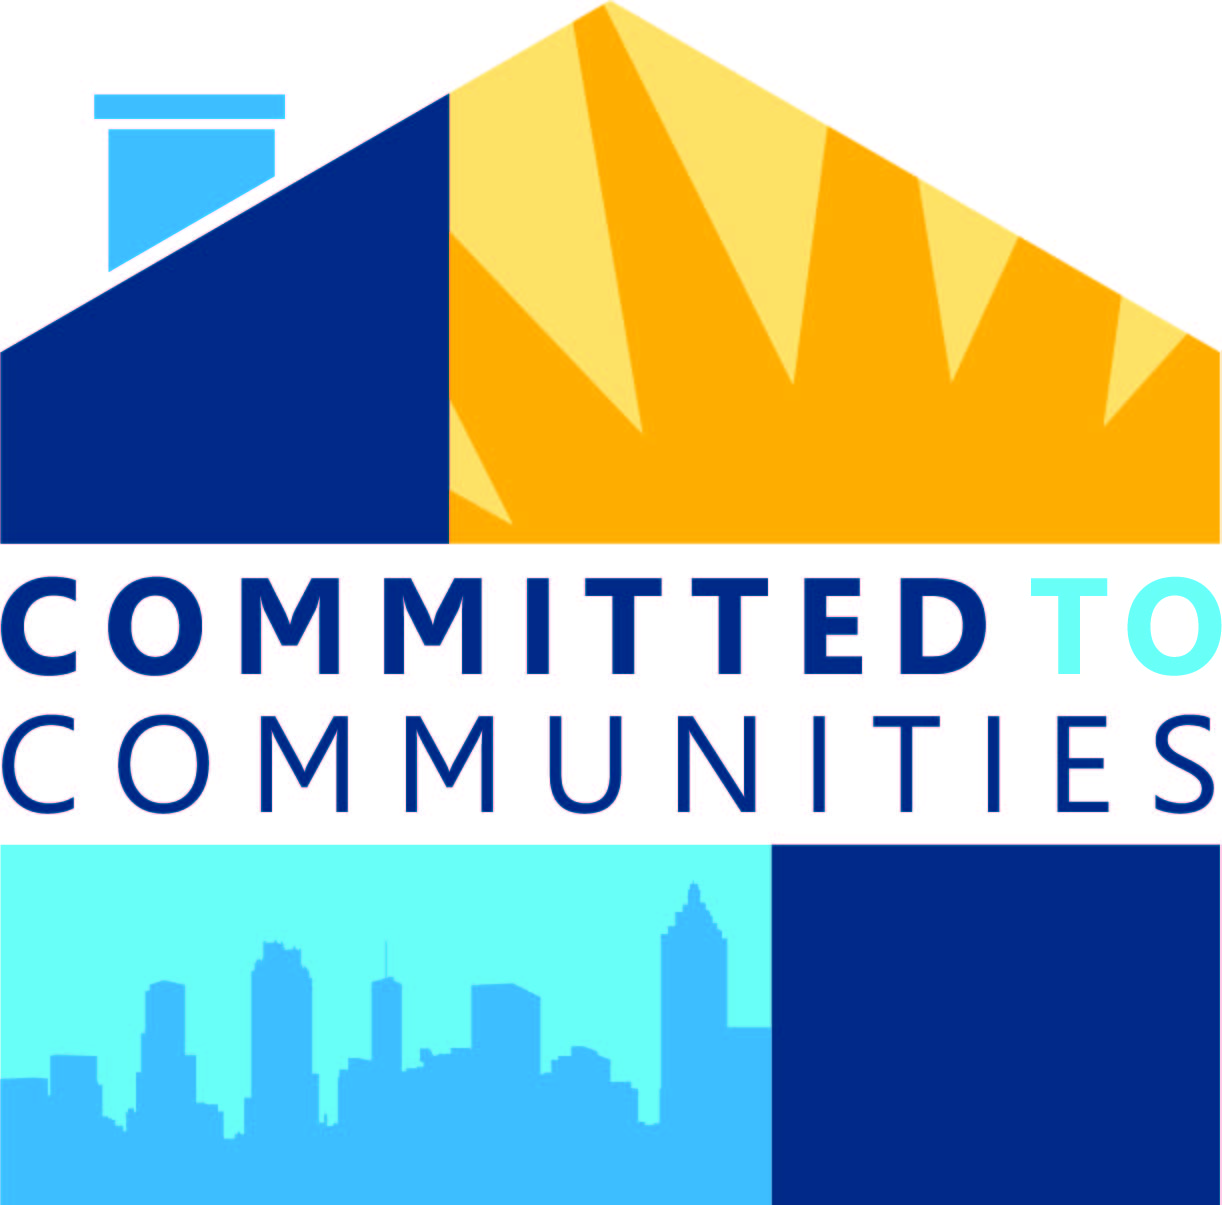 Committed to Communities